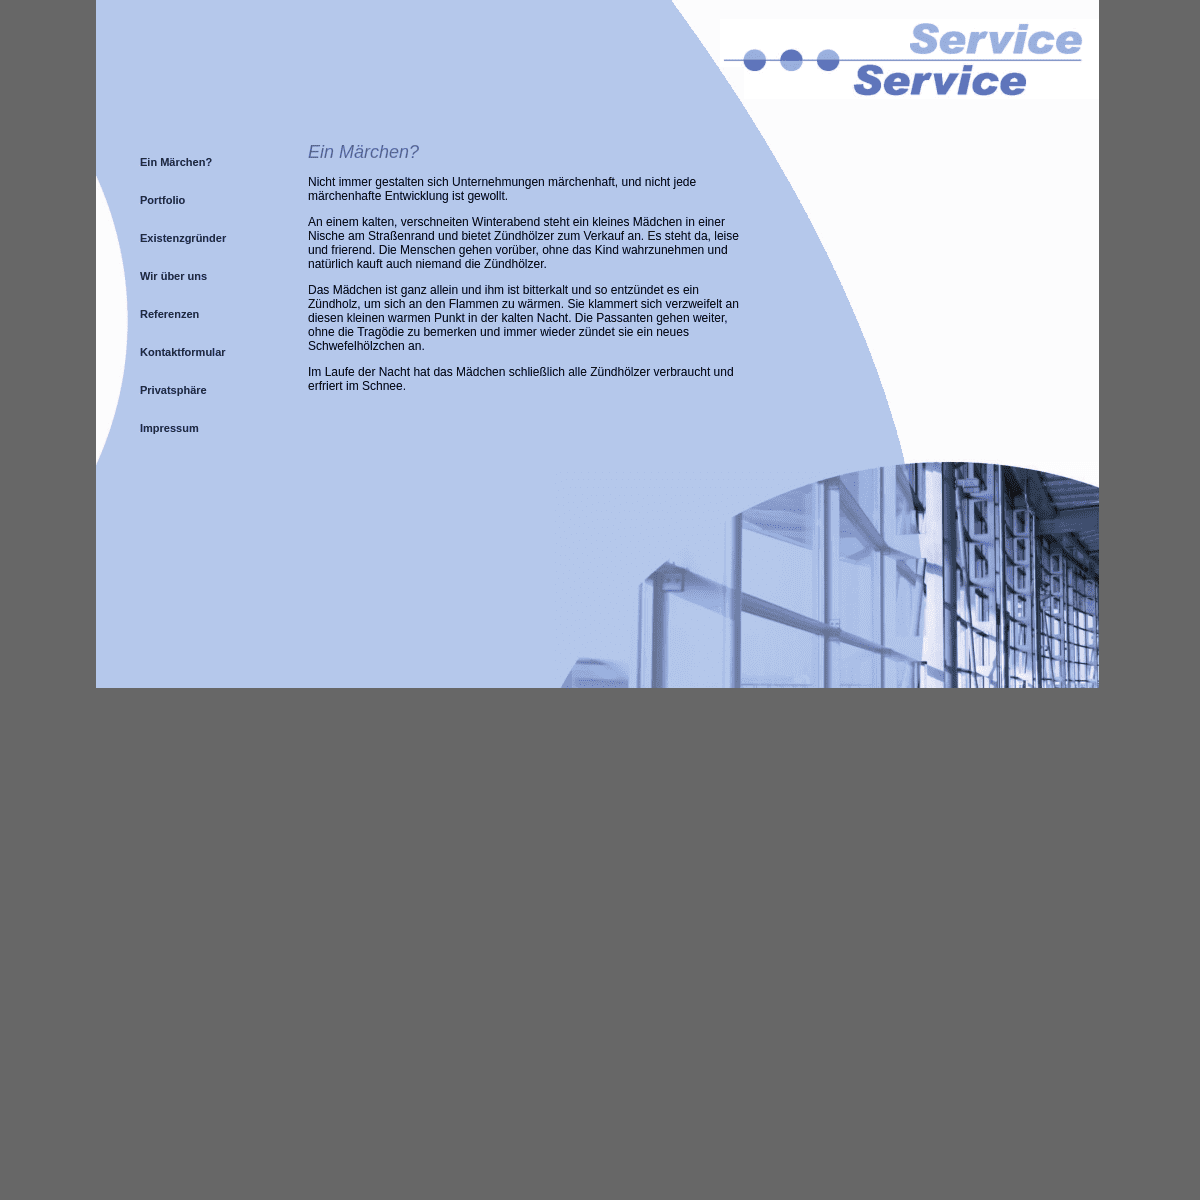 A complete backup of https://serviceservice.eu